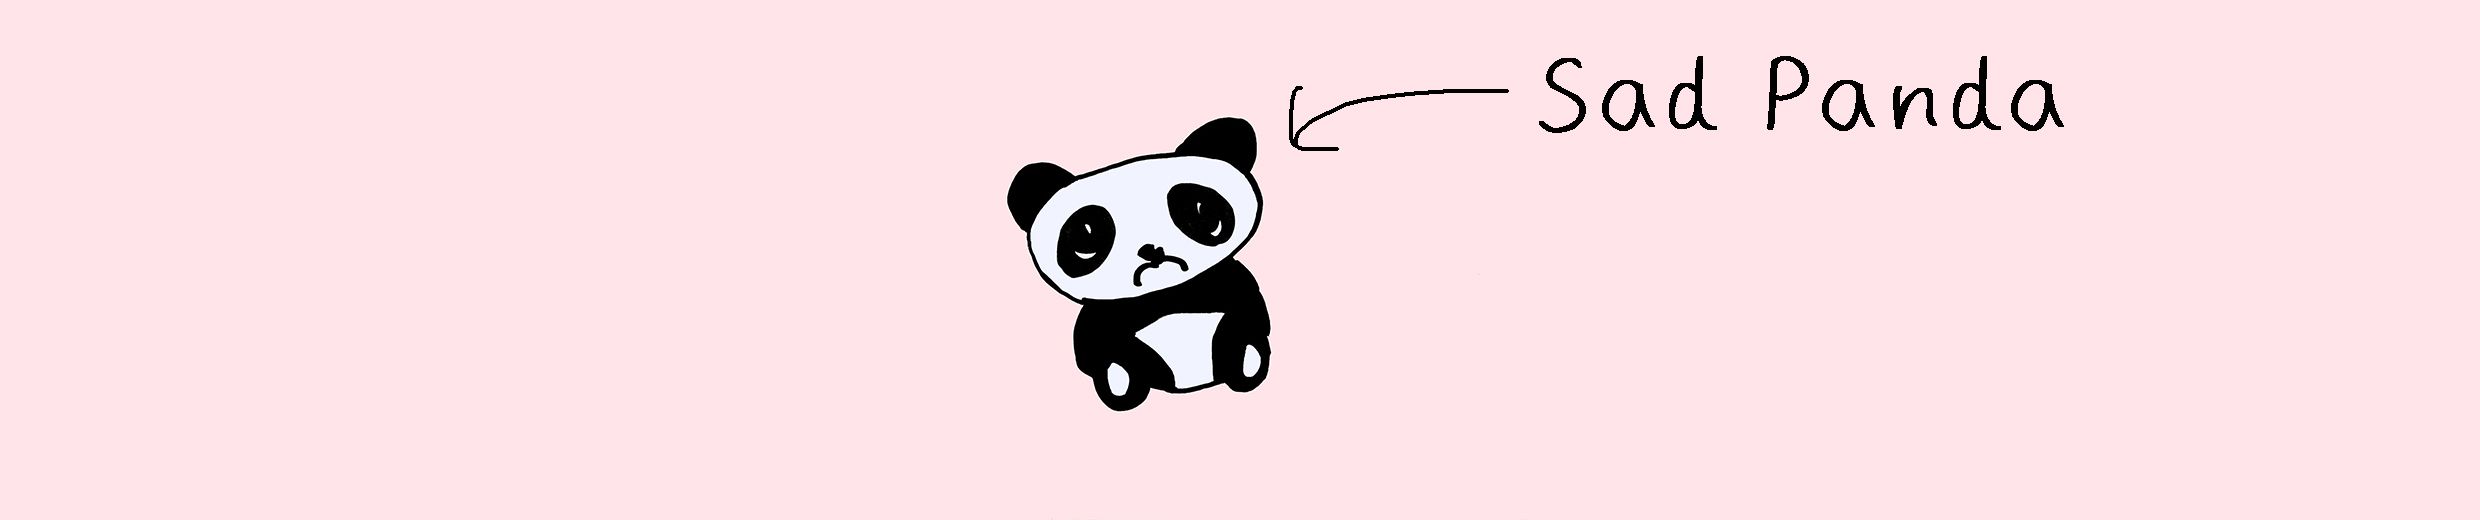 Stream Sad Panda music | Listen to songs, albums, playlists for free on  SoundCloud